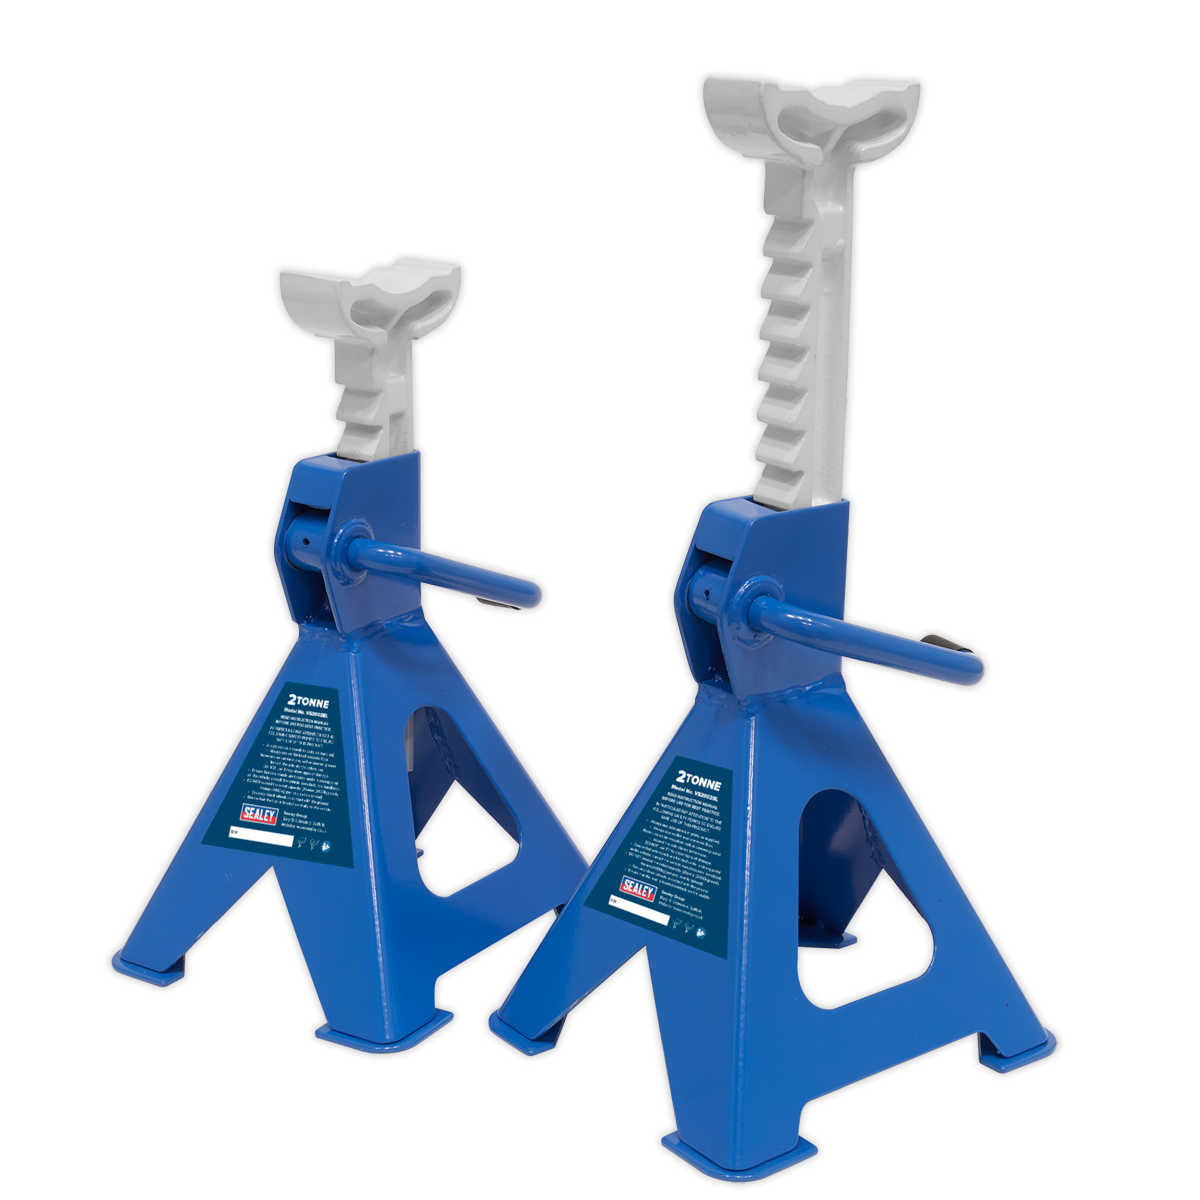 Sealey Axle Stands (Pair) 2 Tonne Capacity per Stand Ratchet Type - Blue